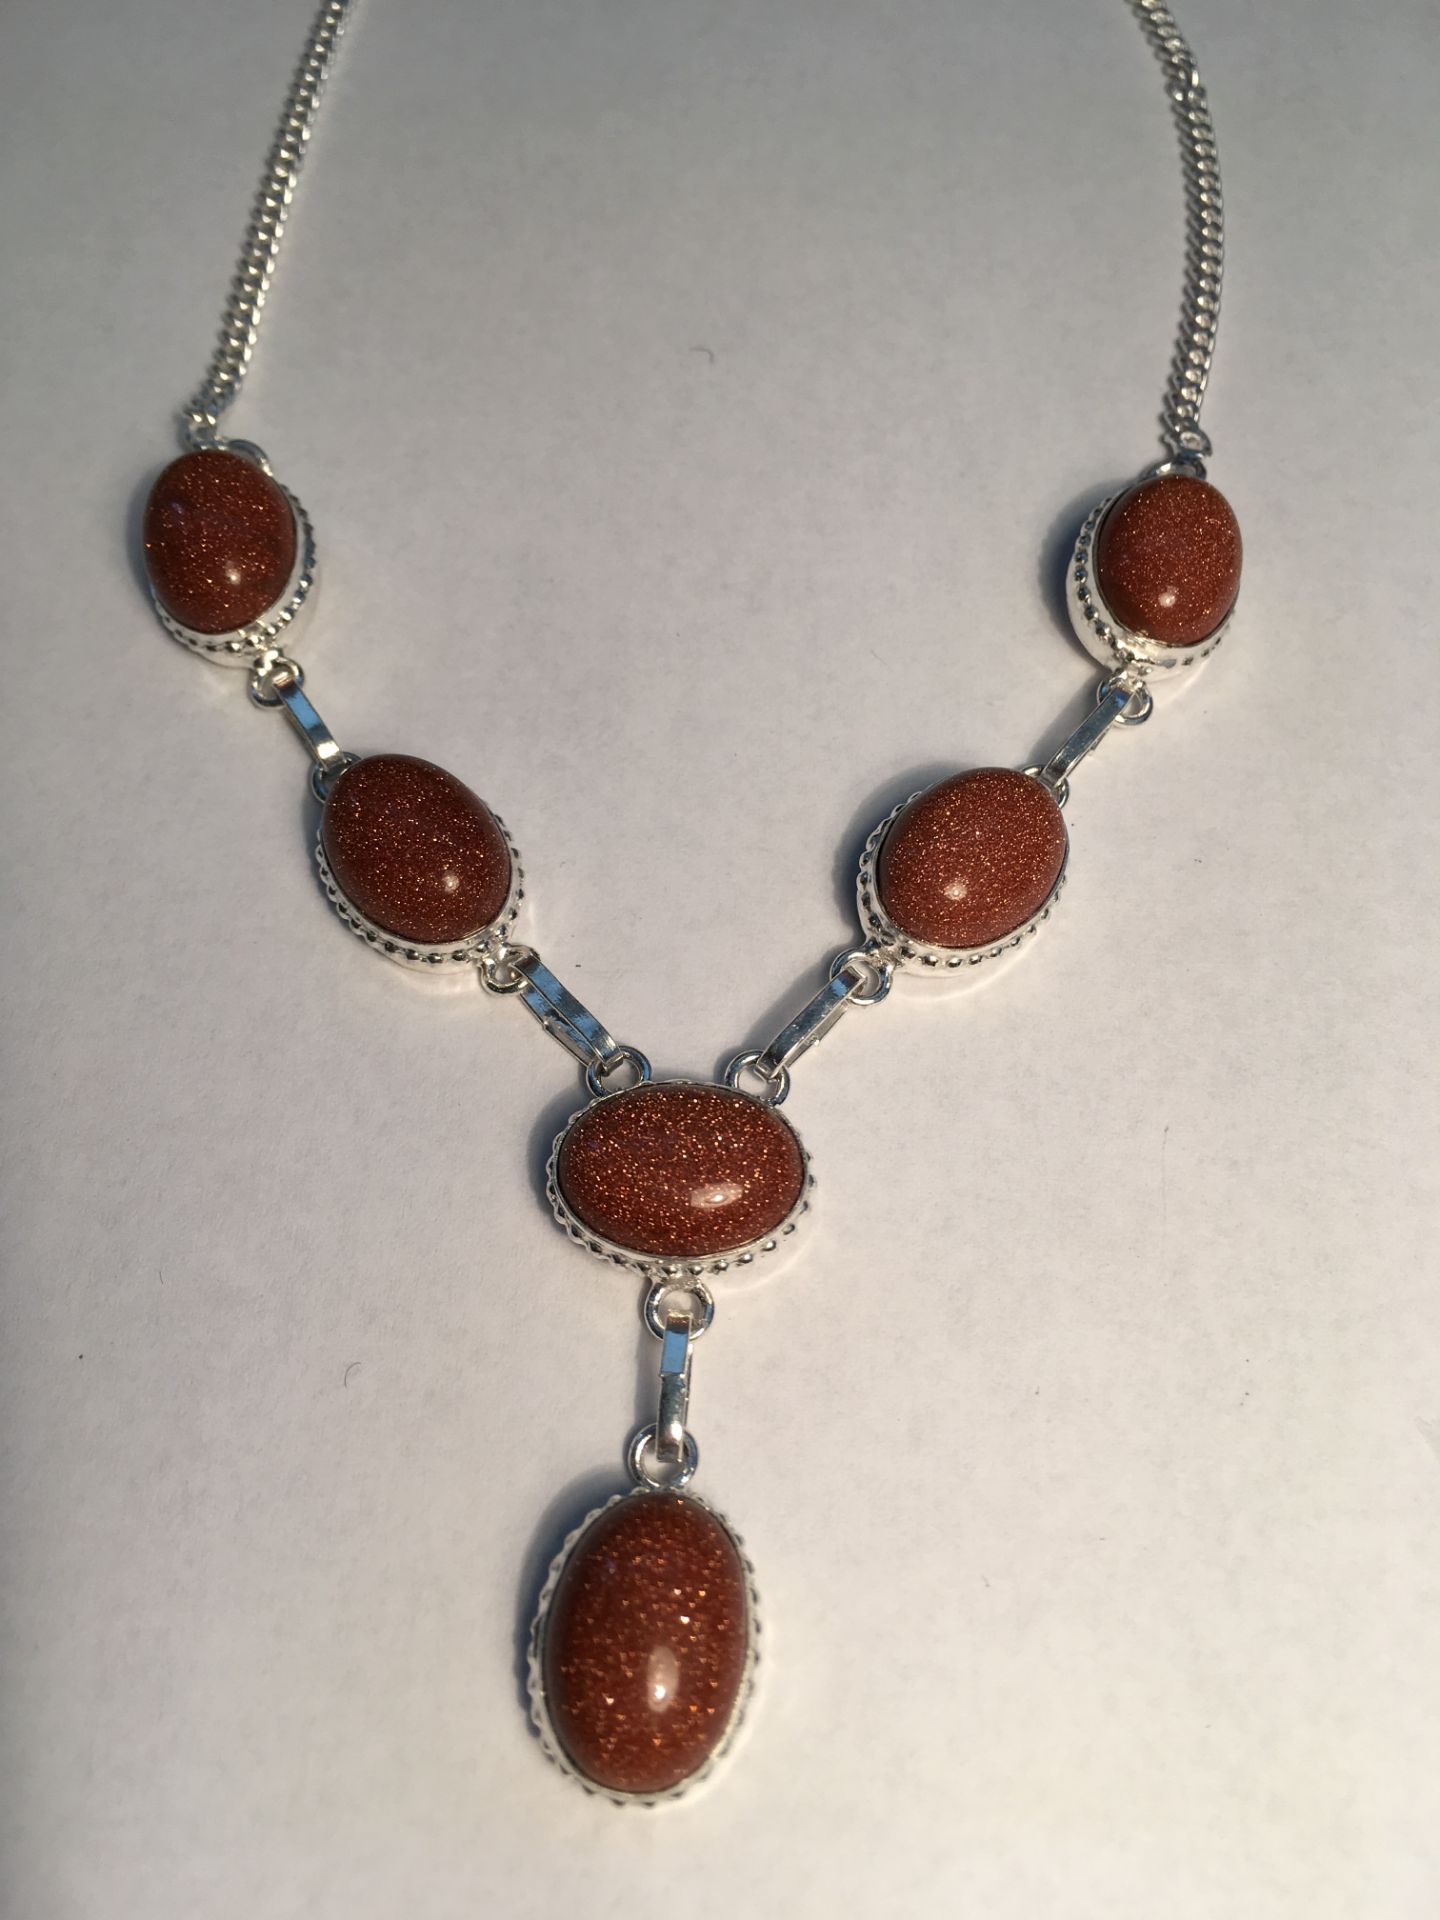 Goldstone Gems .925 Silver Jewellery Necklace 17 Inches - Image 2 of 2